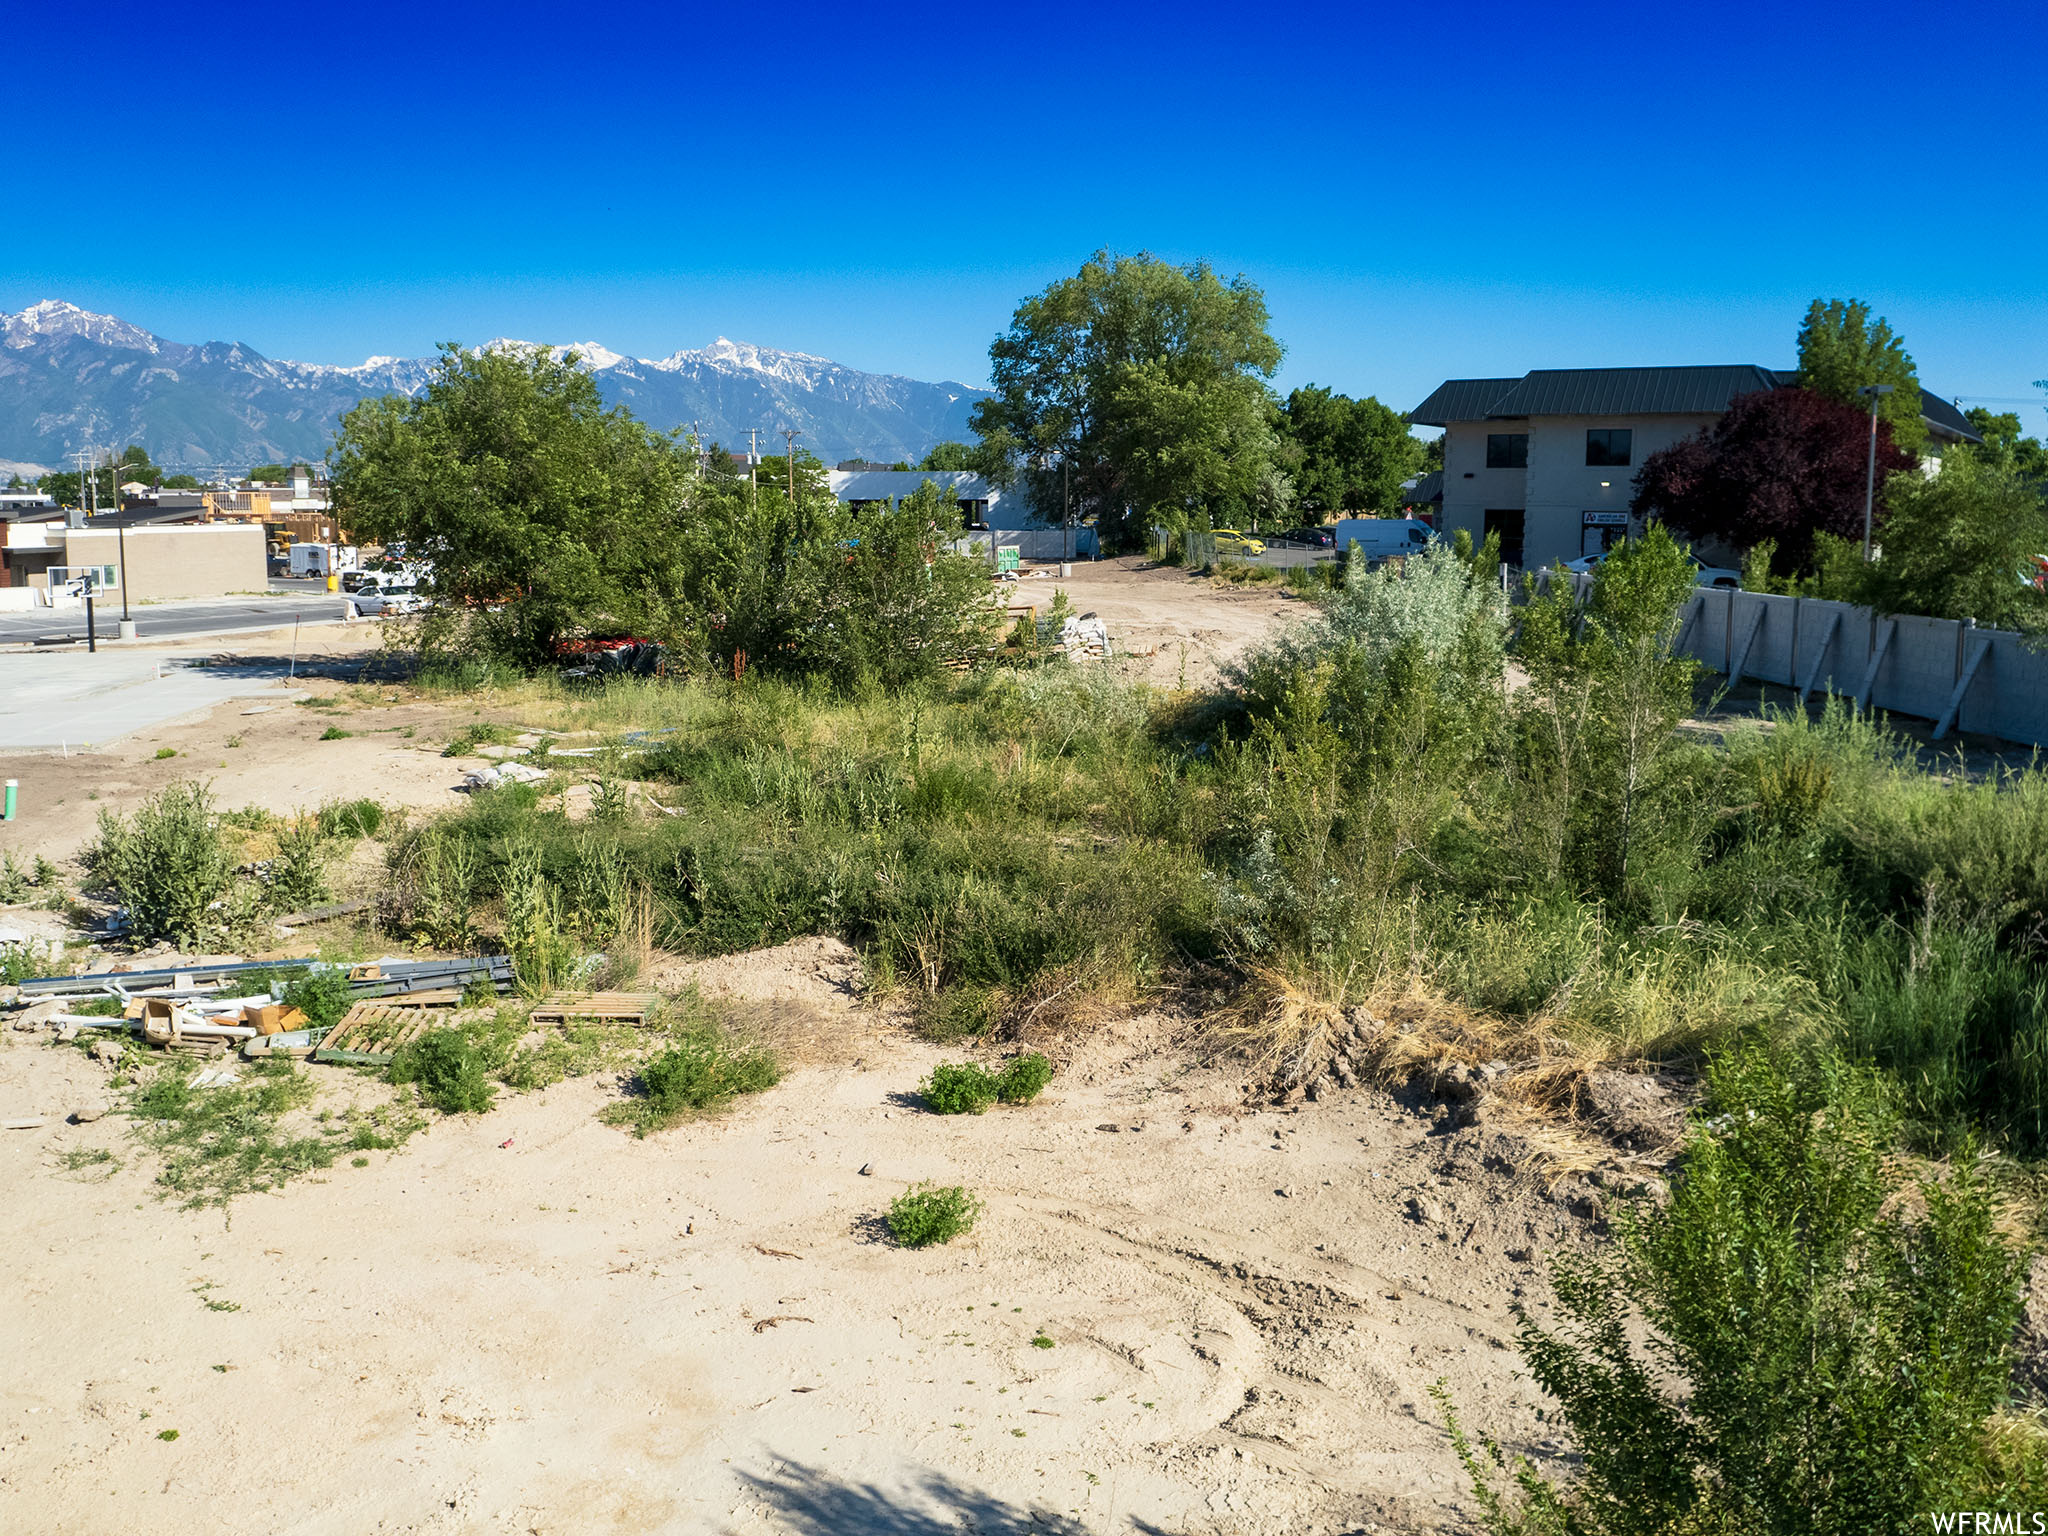 1854 W 4100 S, West Valley City, Utah 84119, ,Land,For sale,4100,1884465